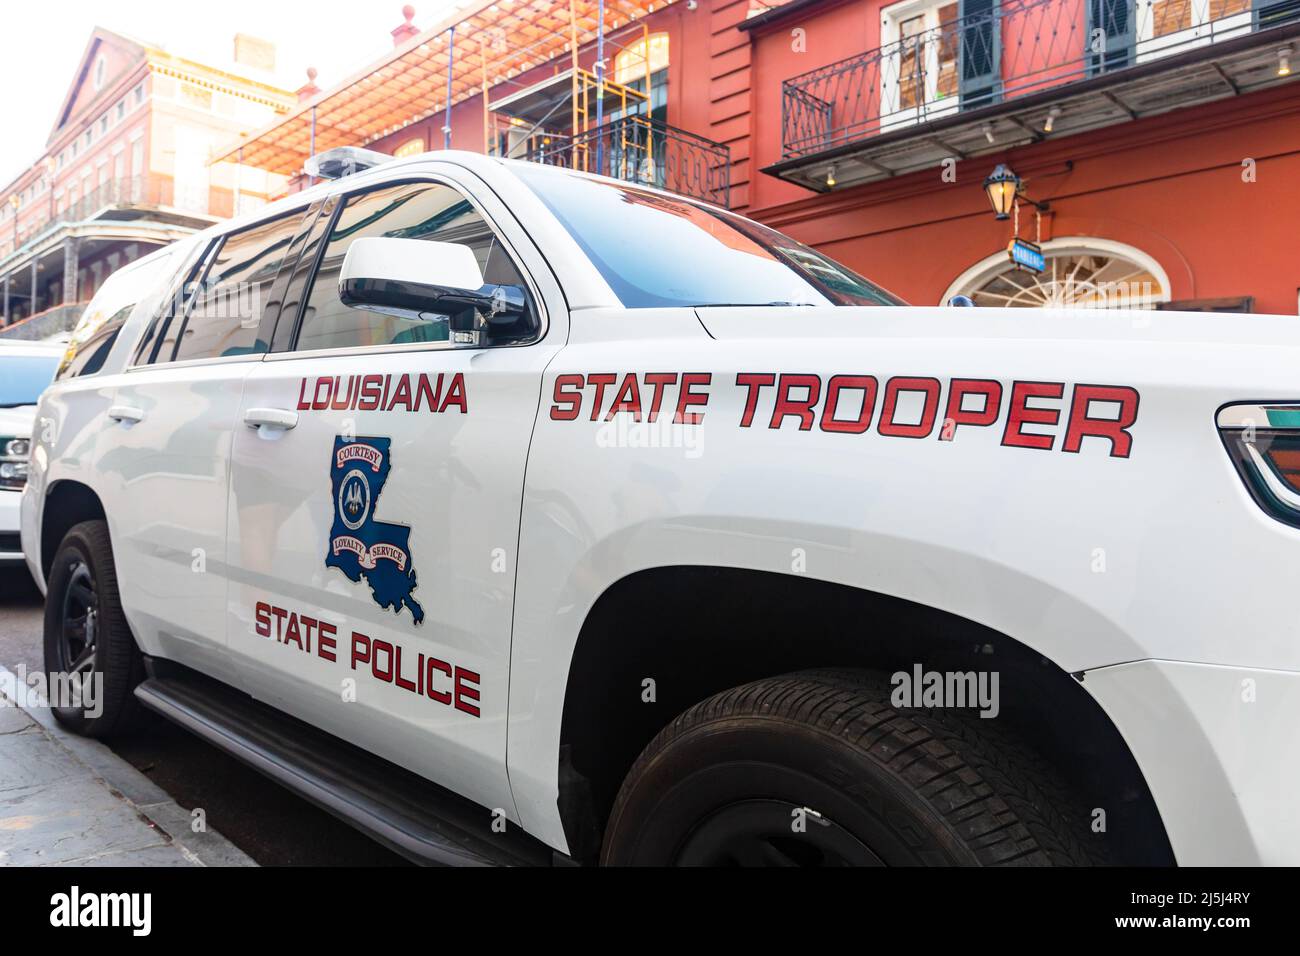 Louisiana State Trooper Vehicle in the New Orleans French Quarter Stock Photo